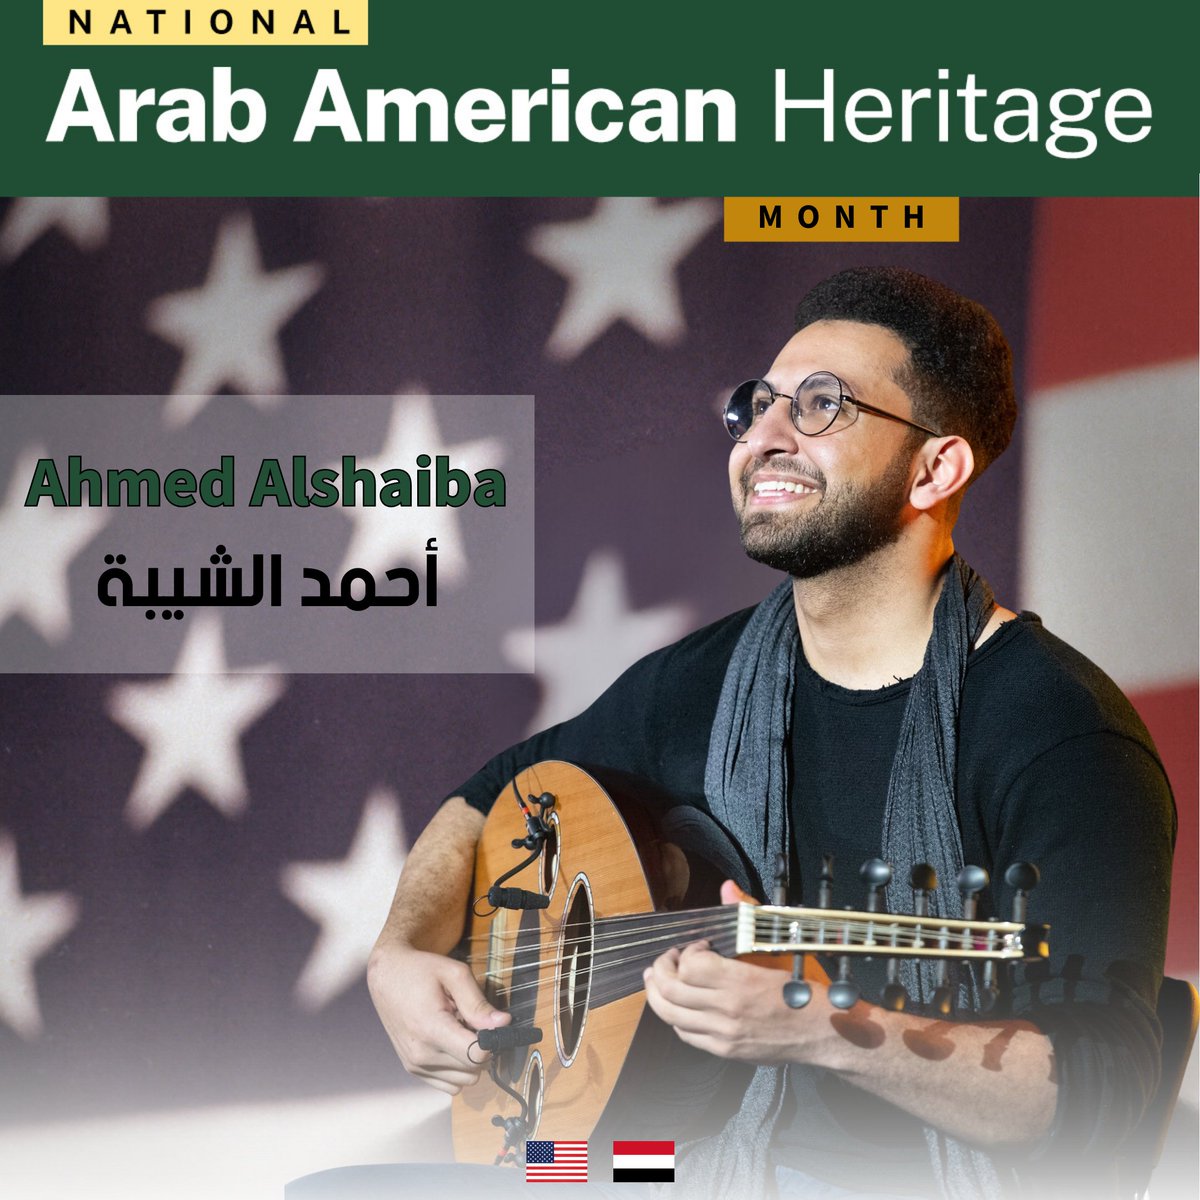 This #ArabAmericanHeritageMonth, we honor the legacy of Ahmed Alshaiba, a self-taught Yemeni American musician who captivated audiences with his mastery of traditional and contemporary instruments. From New York City to global stages, his talent knew no bounds 🎶🌍.